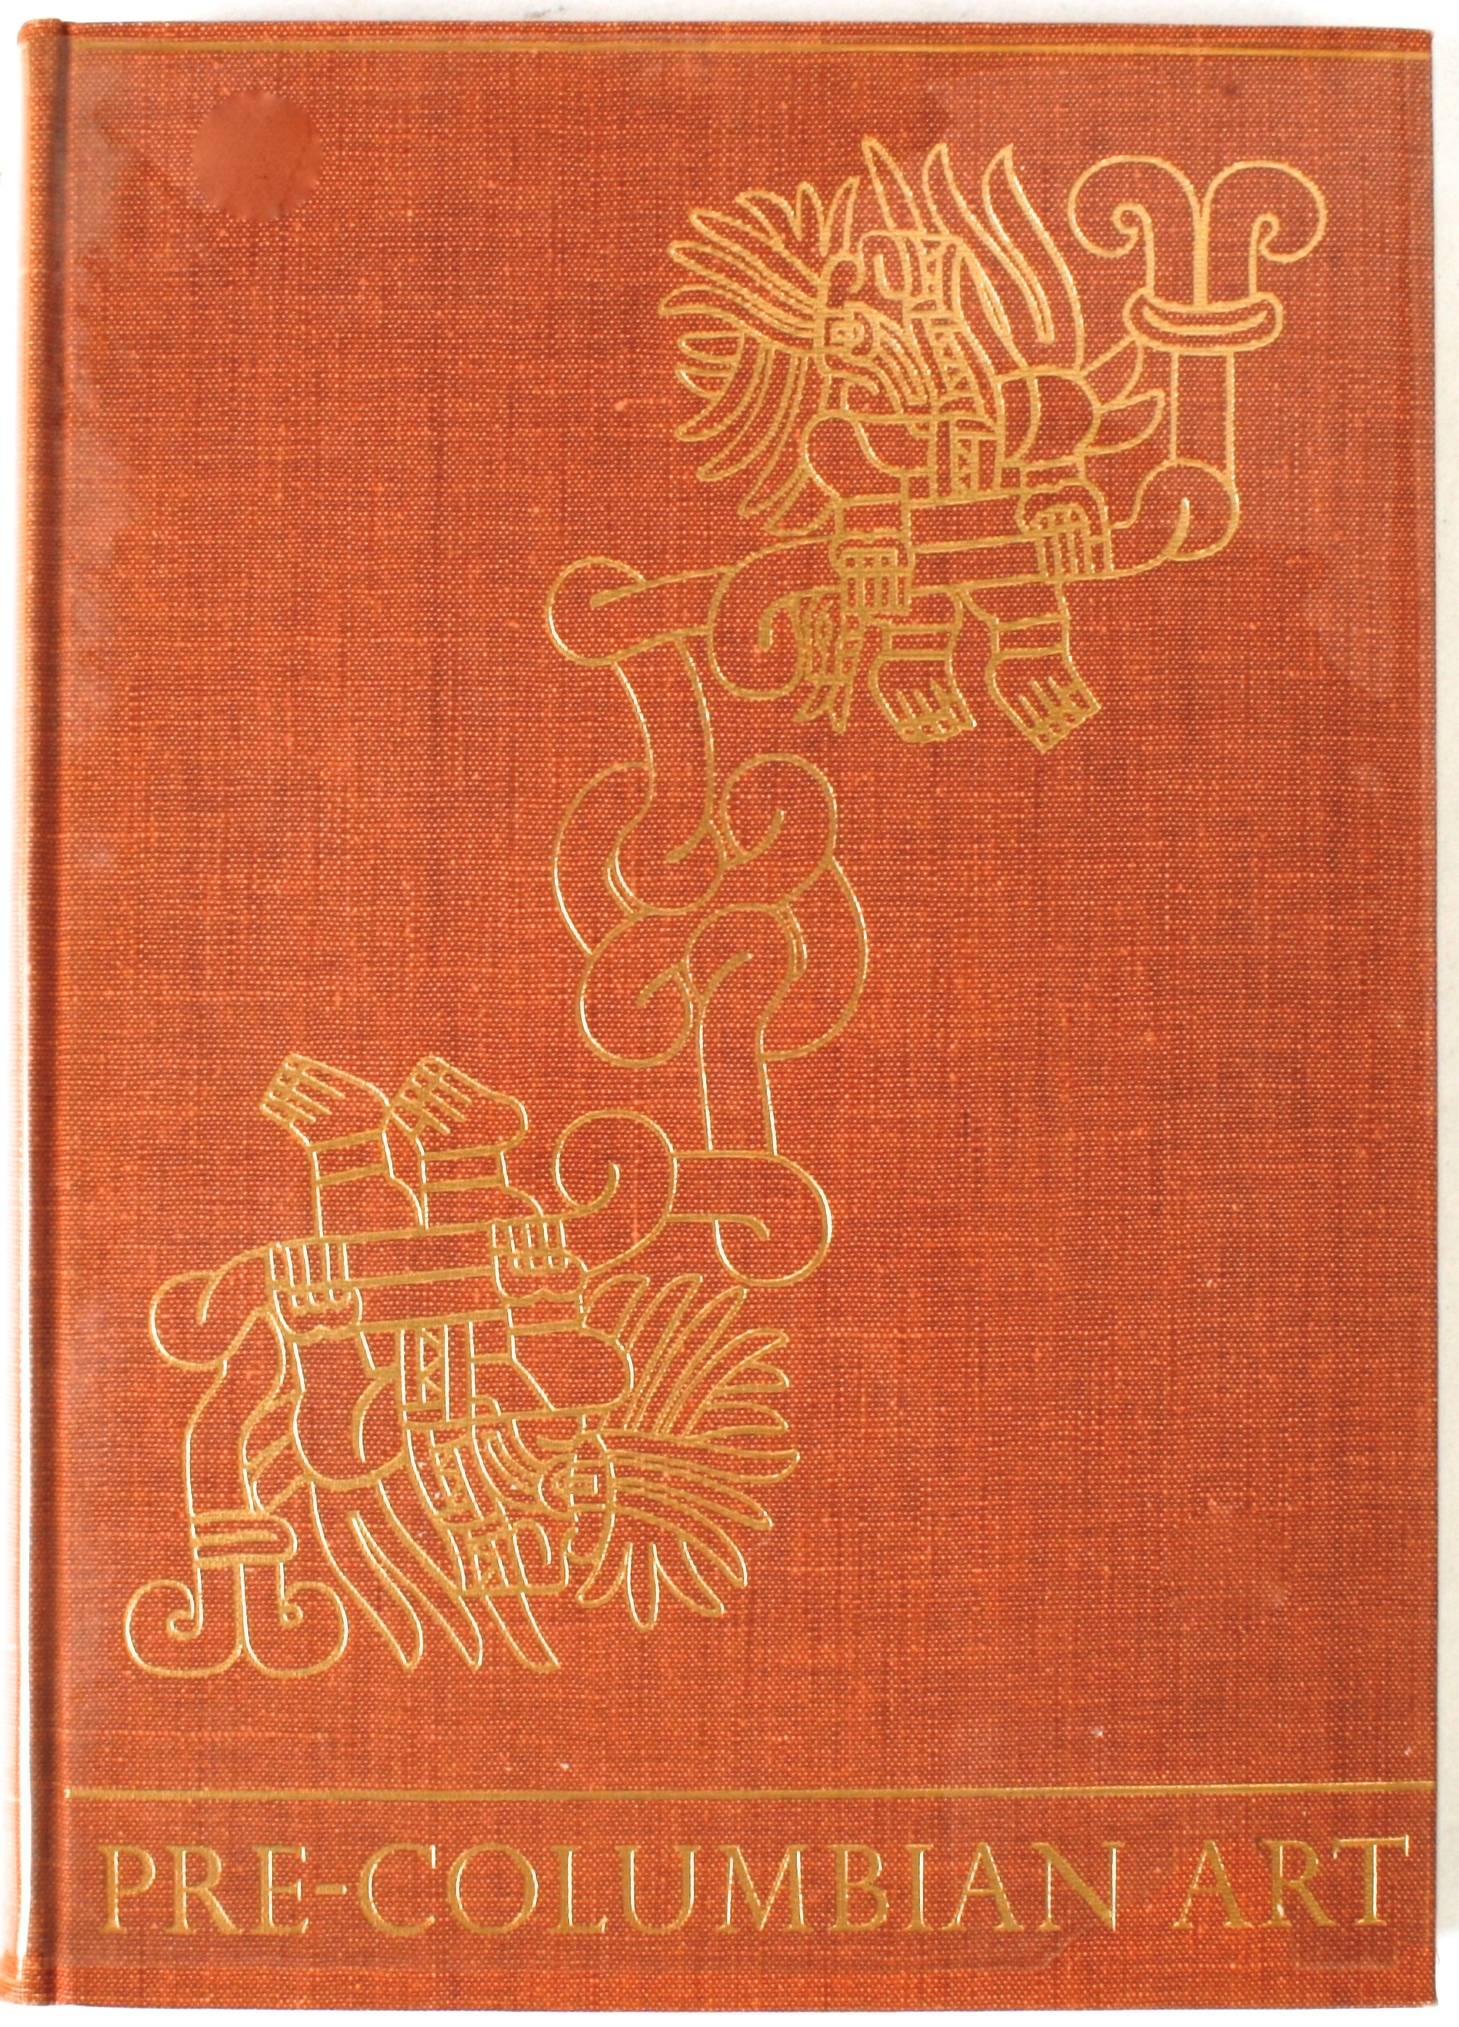 Pre-Columbian Art, New York: Phaidon Publishers, Inc., 1957. First edition hardcover with skip case. 285 pp. A vintage book cataloguing Robert Woods Bliss' collection of Pre-Columbian art. Bliss fell in love with the art and started collecting it